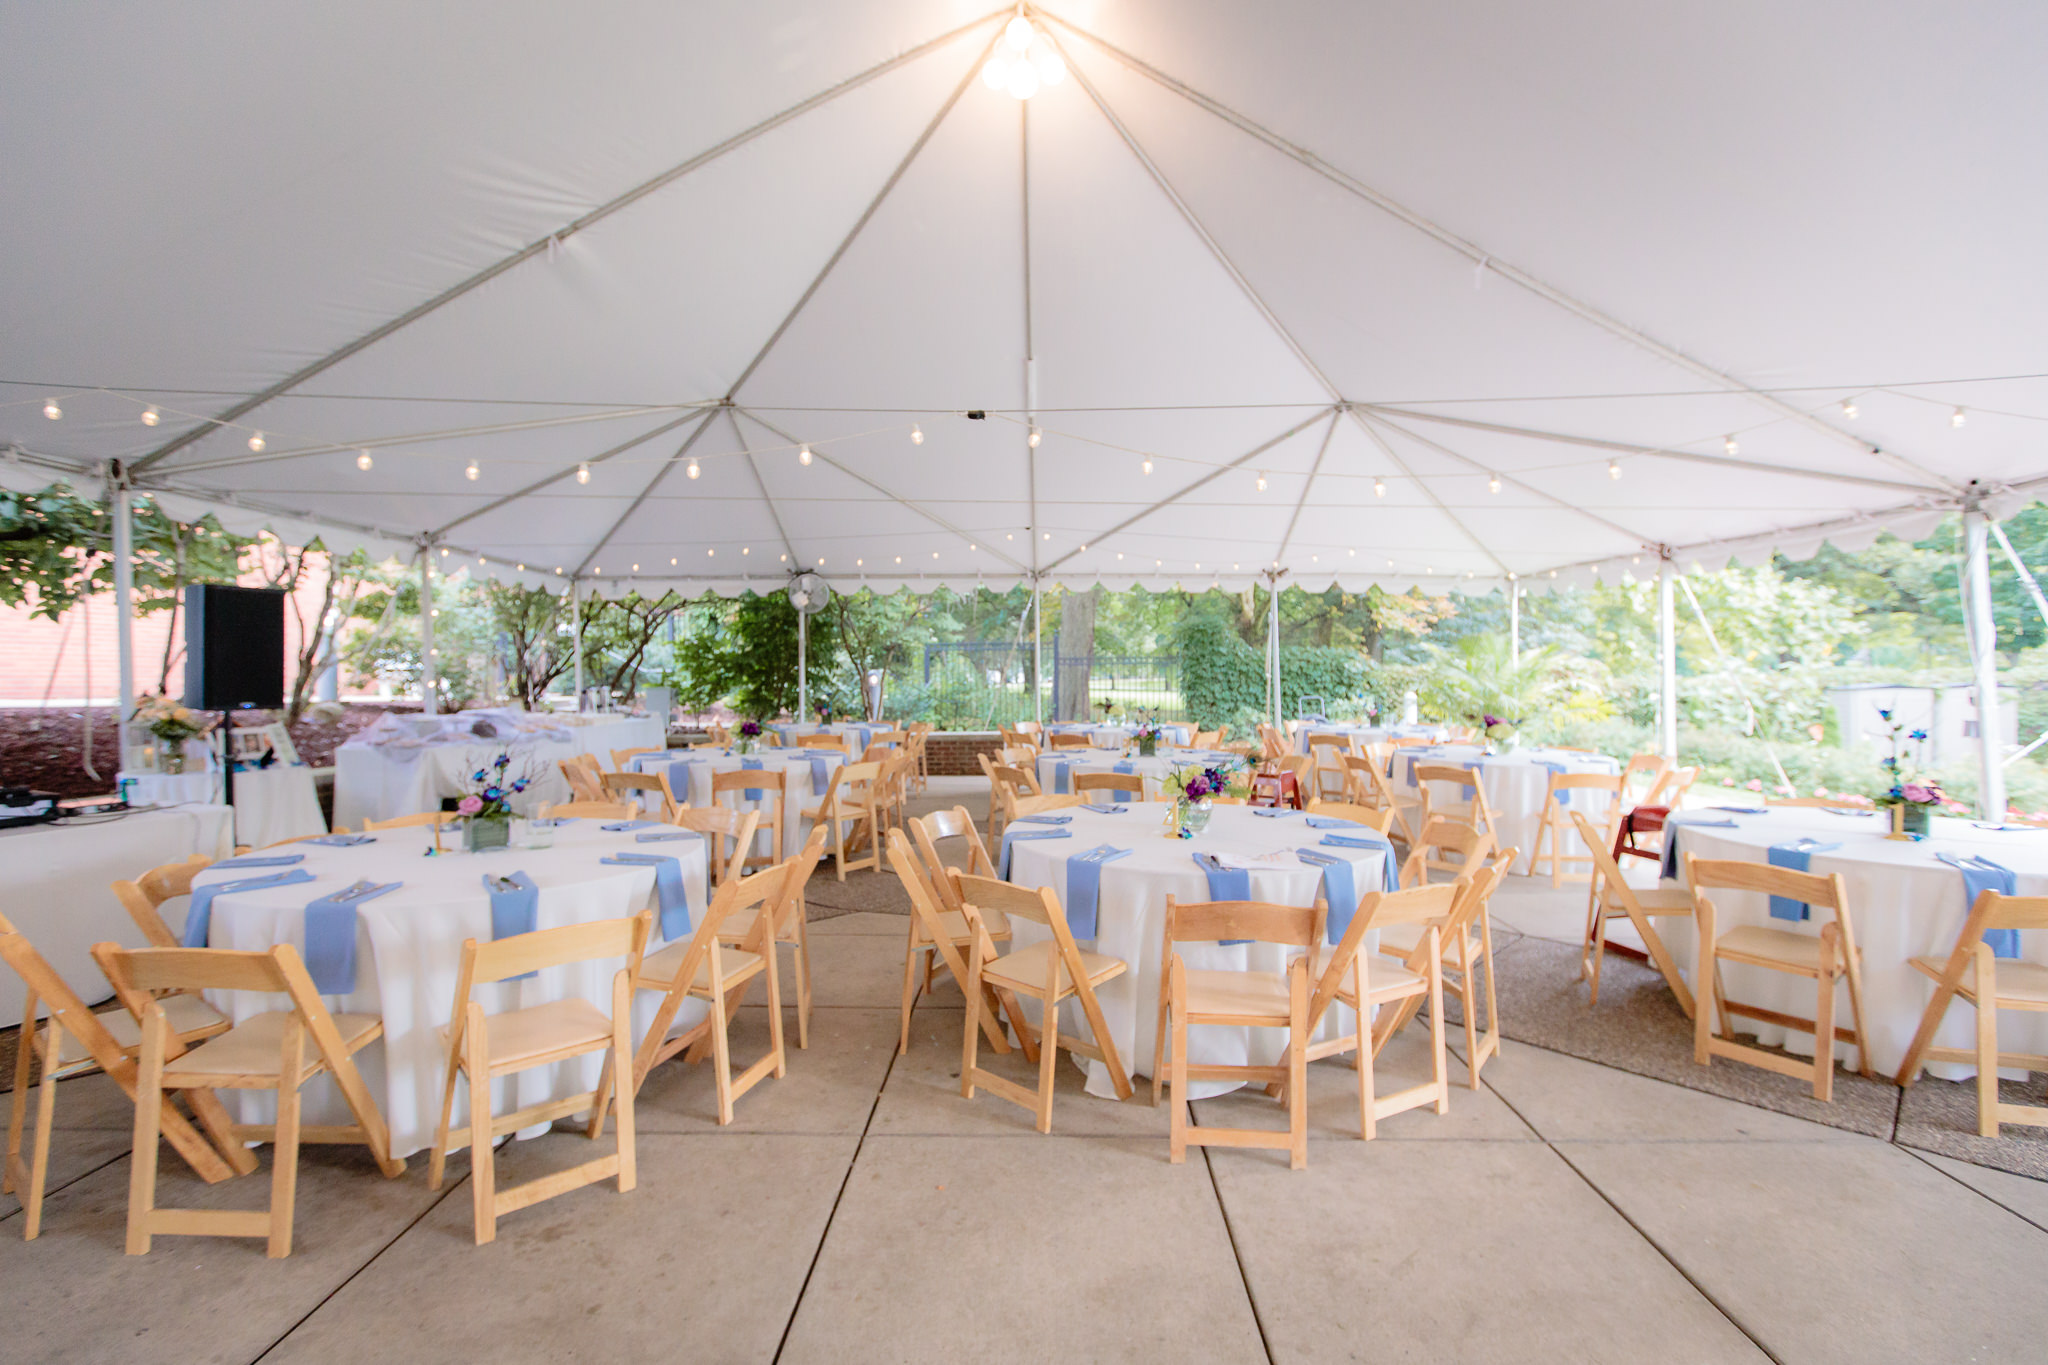 Outdoor tent set up for a wedding reception at the National Aviary in Pittsburgh, PA